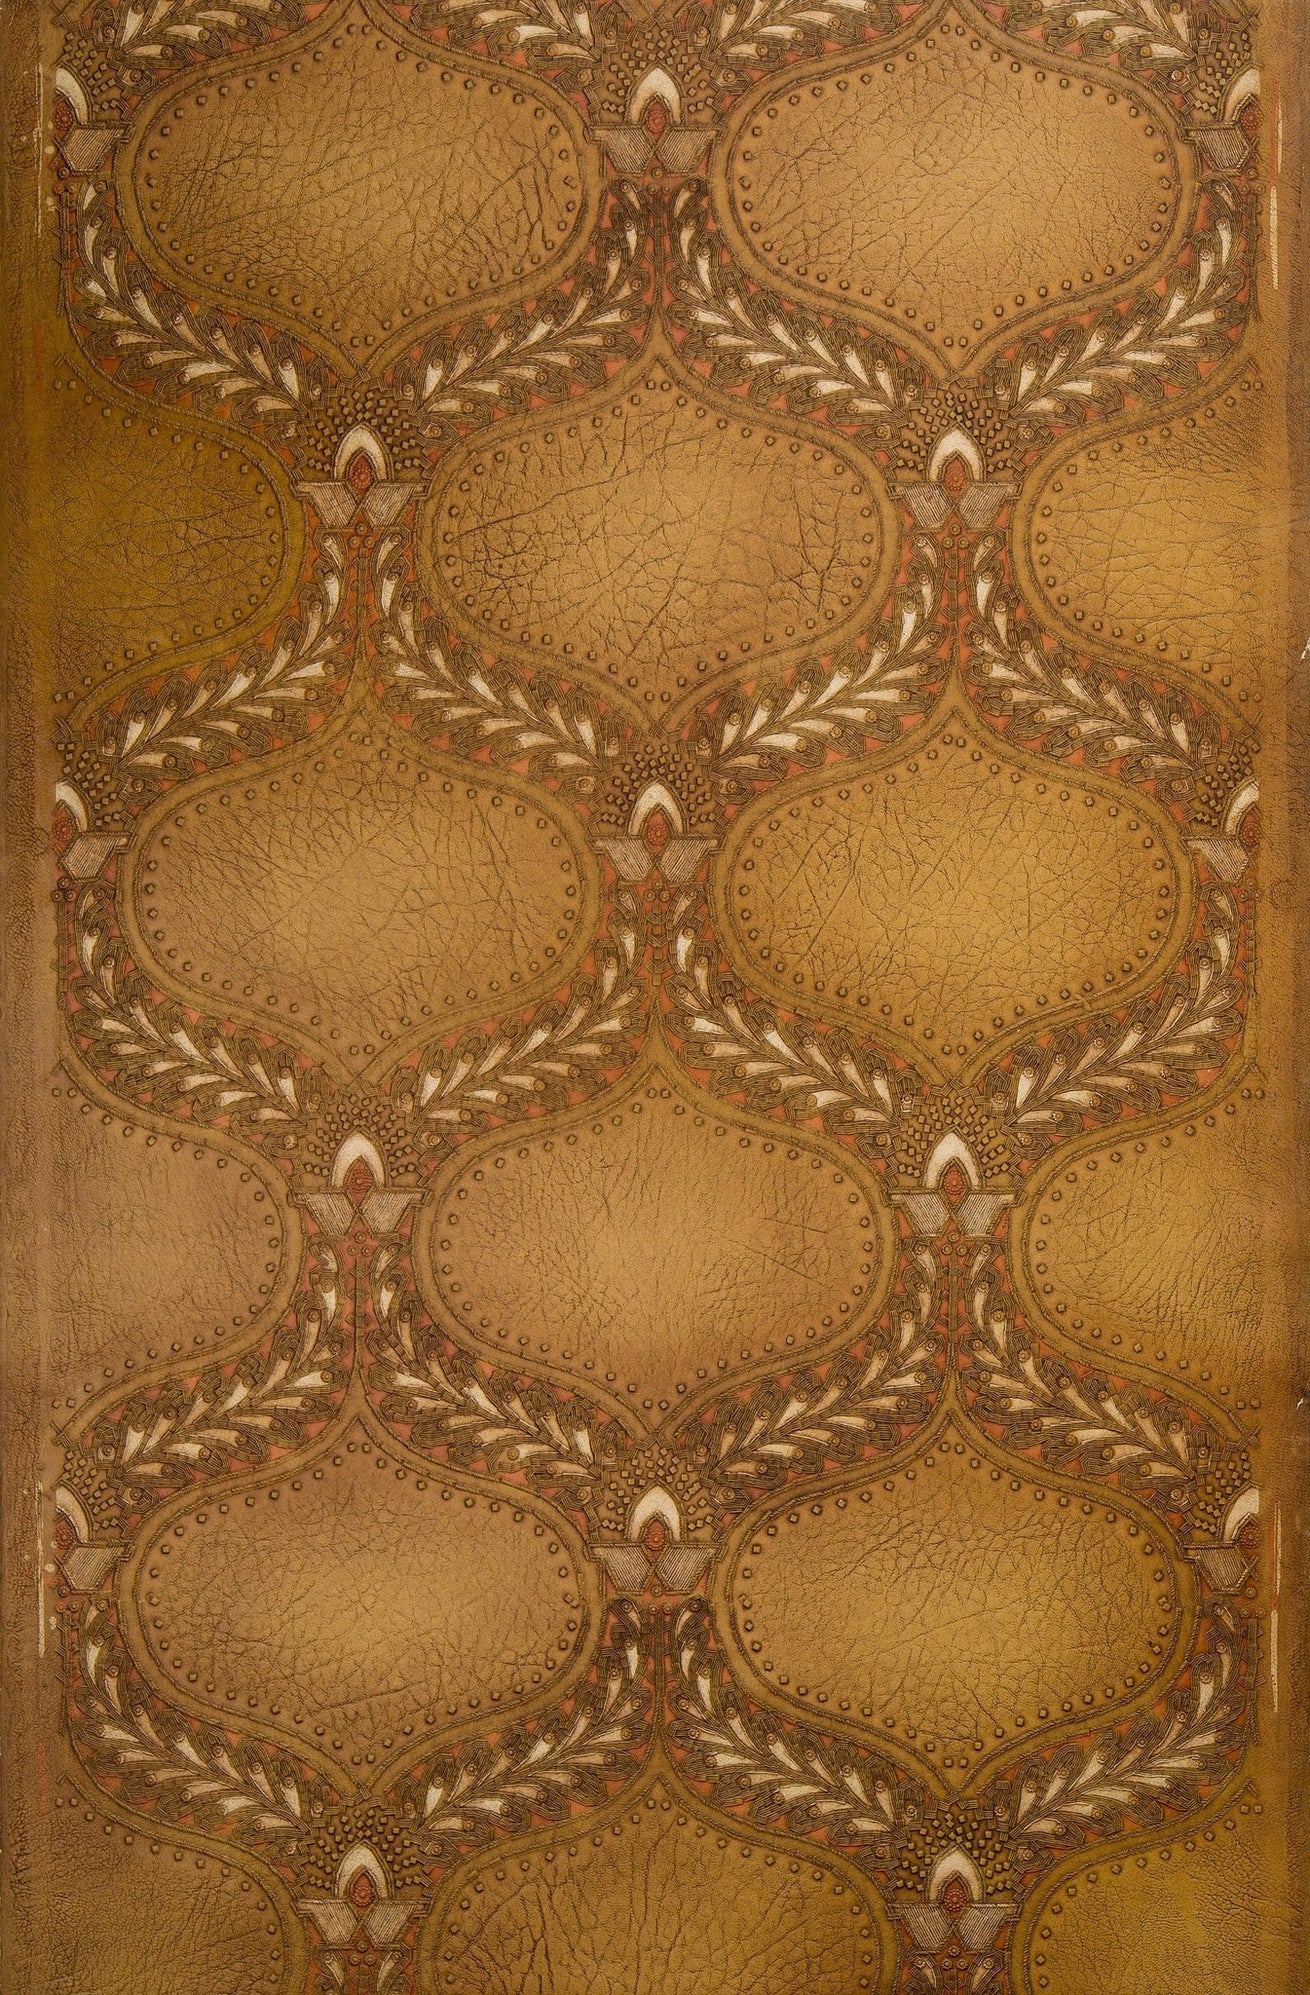 Heavily Tooled Piscine Pattern on Leather - Antique Wallpaper Remnant